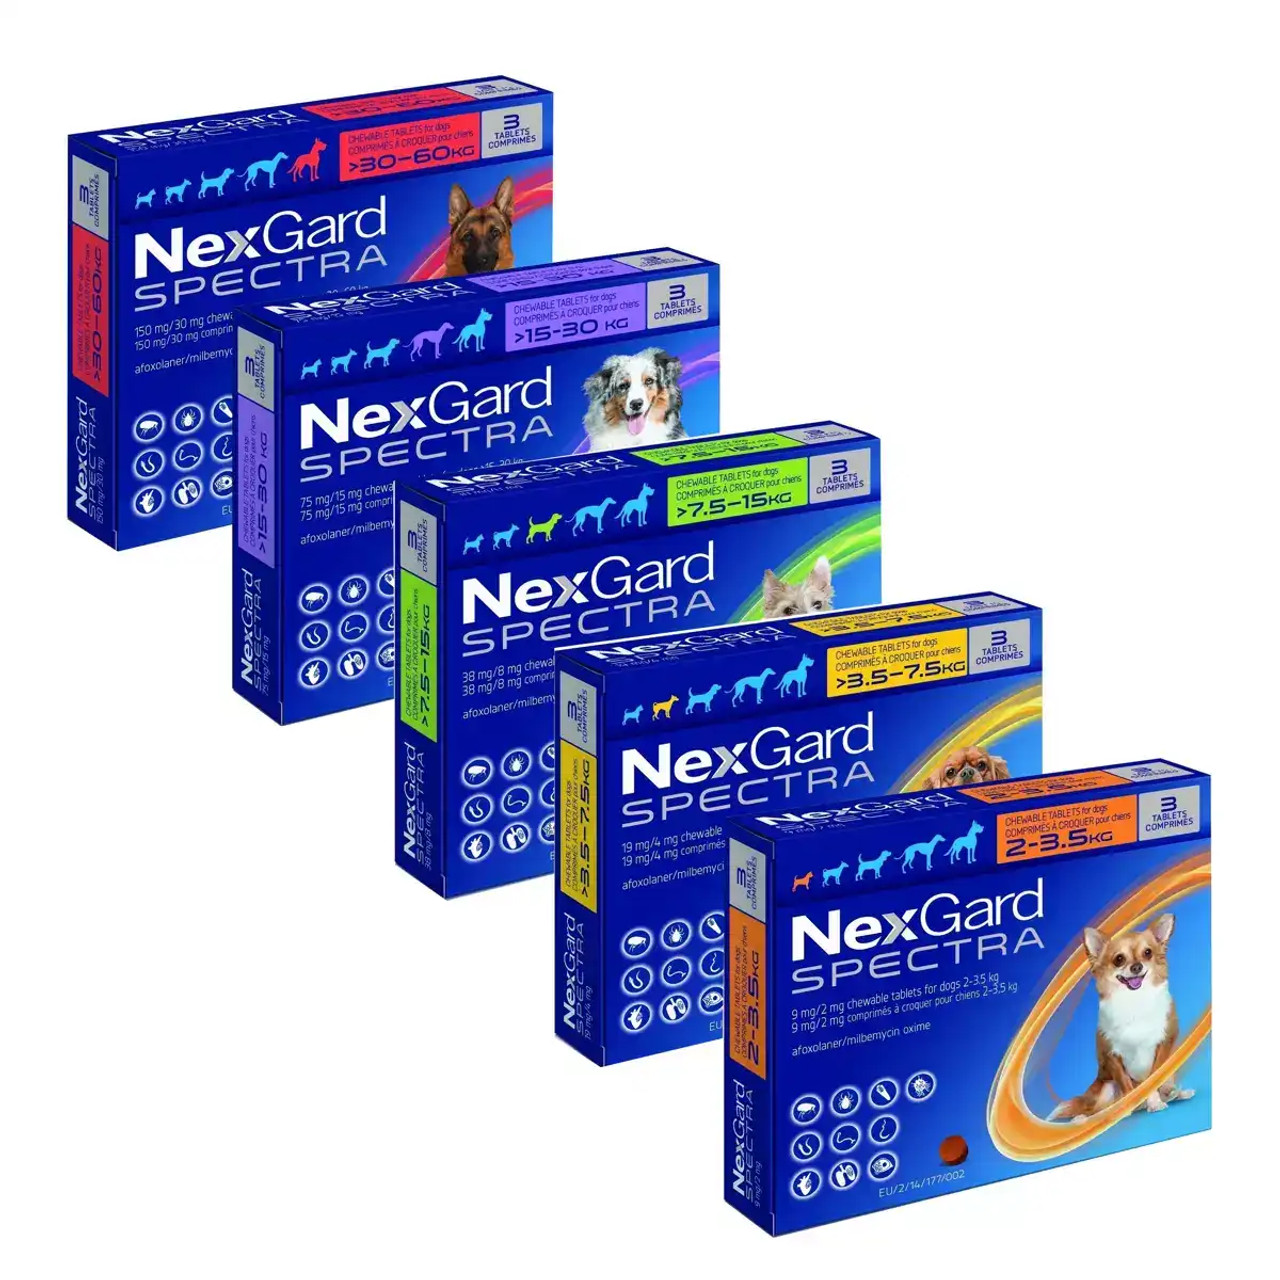 20% Off NexGard Spectra Chewable Tablets for Dogs at Atlantic Pet Products